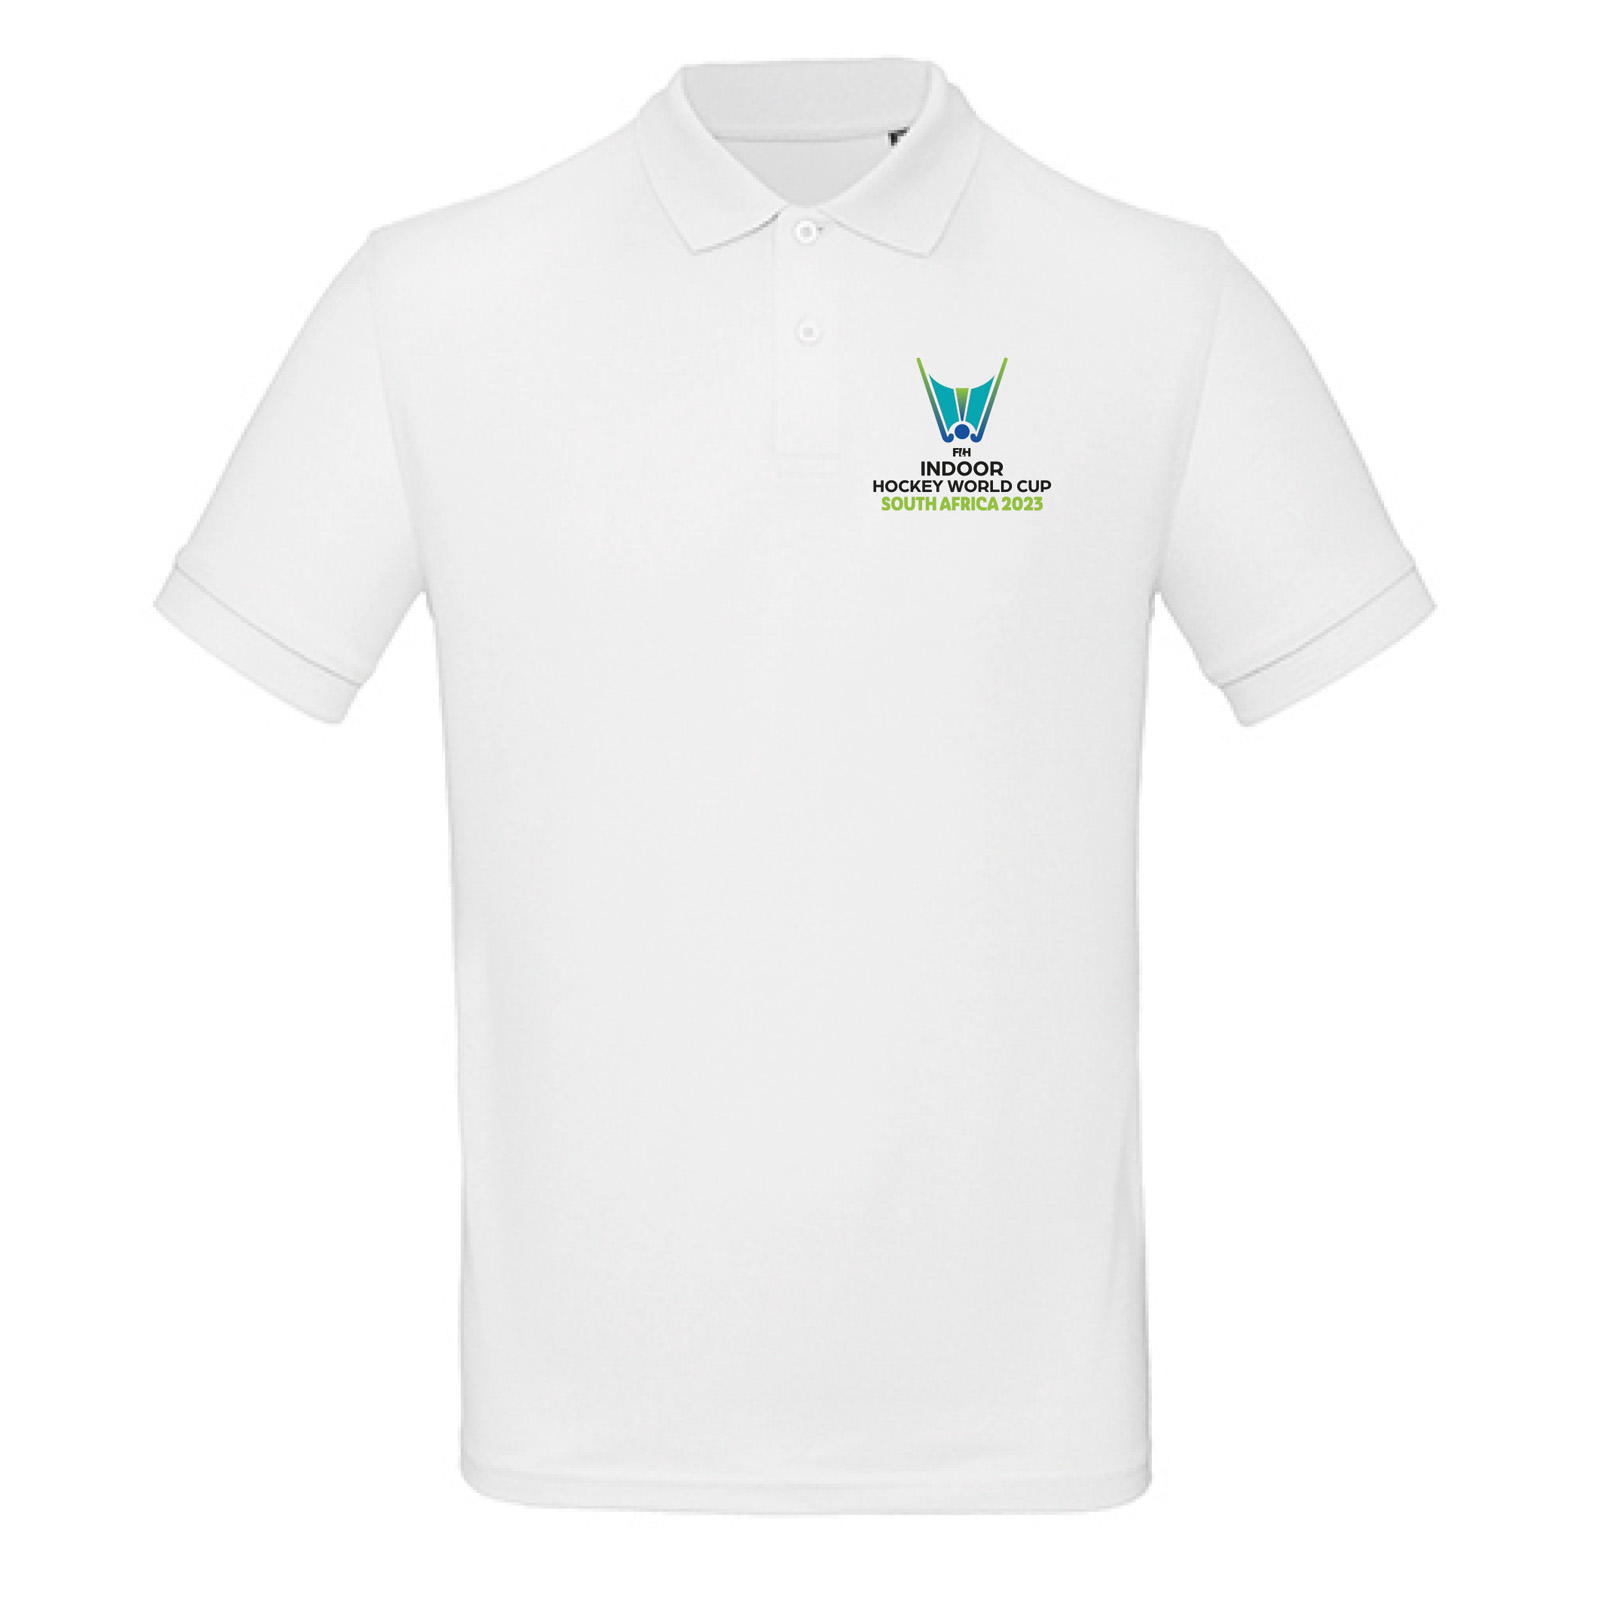 Polo shirt, White - Indoor Hockey World Cup South Africa 2023 